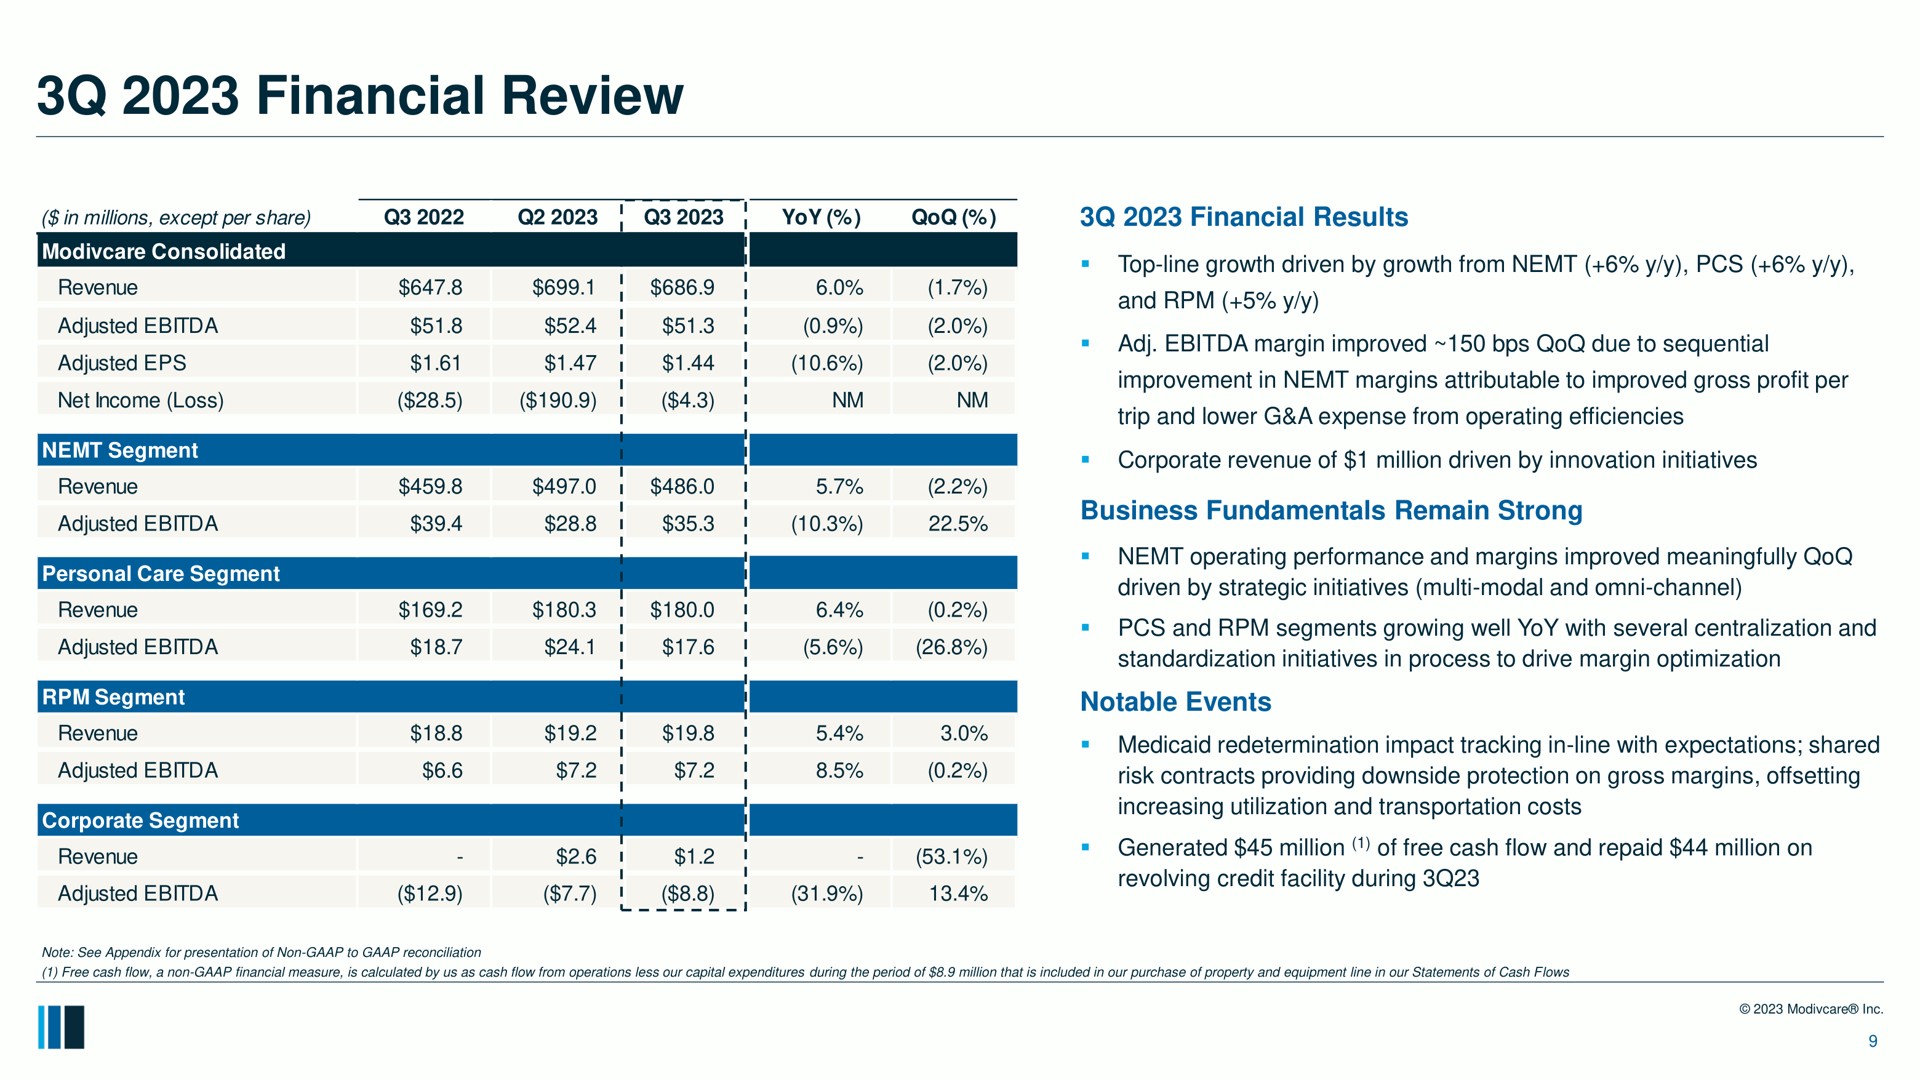 financial review adjusted adjusted a is margin improved due to sequential business fundamentals remain strong evolving credit owe | ModivCare